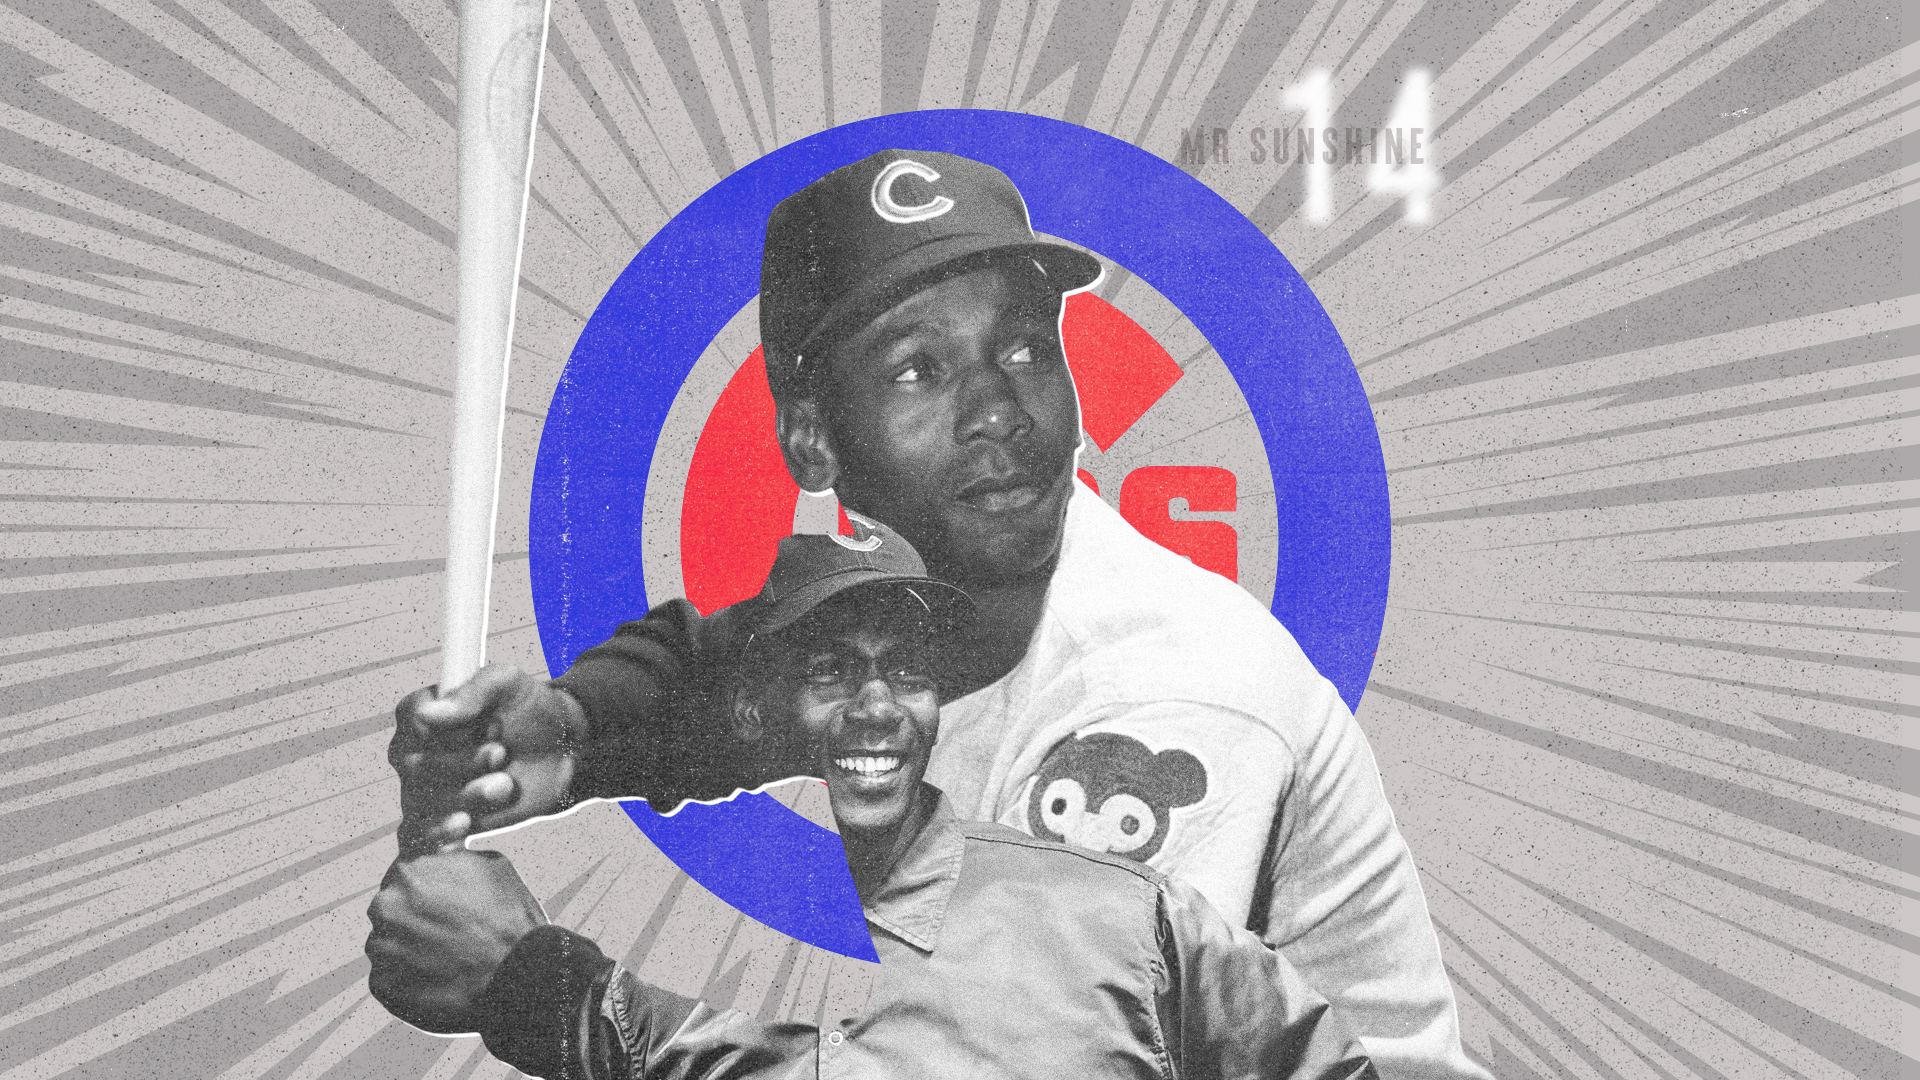 Remembering Mr Sunshine And The 2529 Games That Ernie Banks Pioneered, Us  Sports